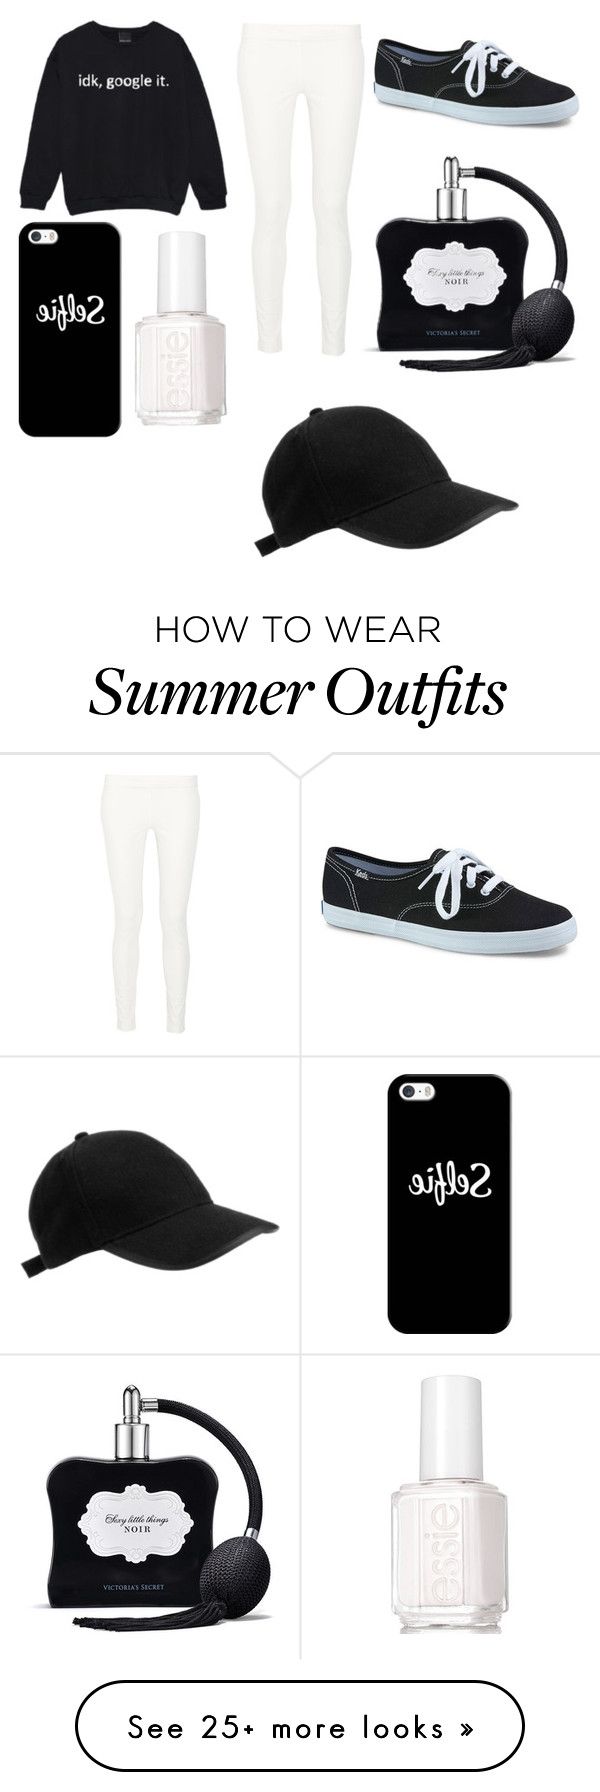 "My outfit pt. 117" by brielleespinal on Polyvore featuring The Row, K...